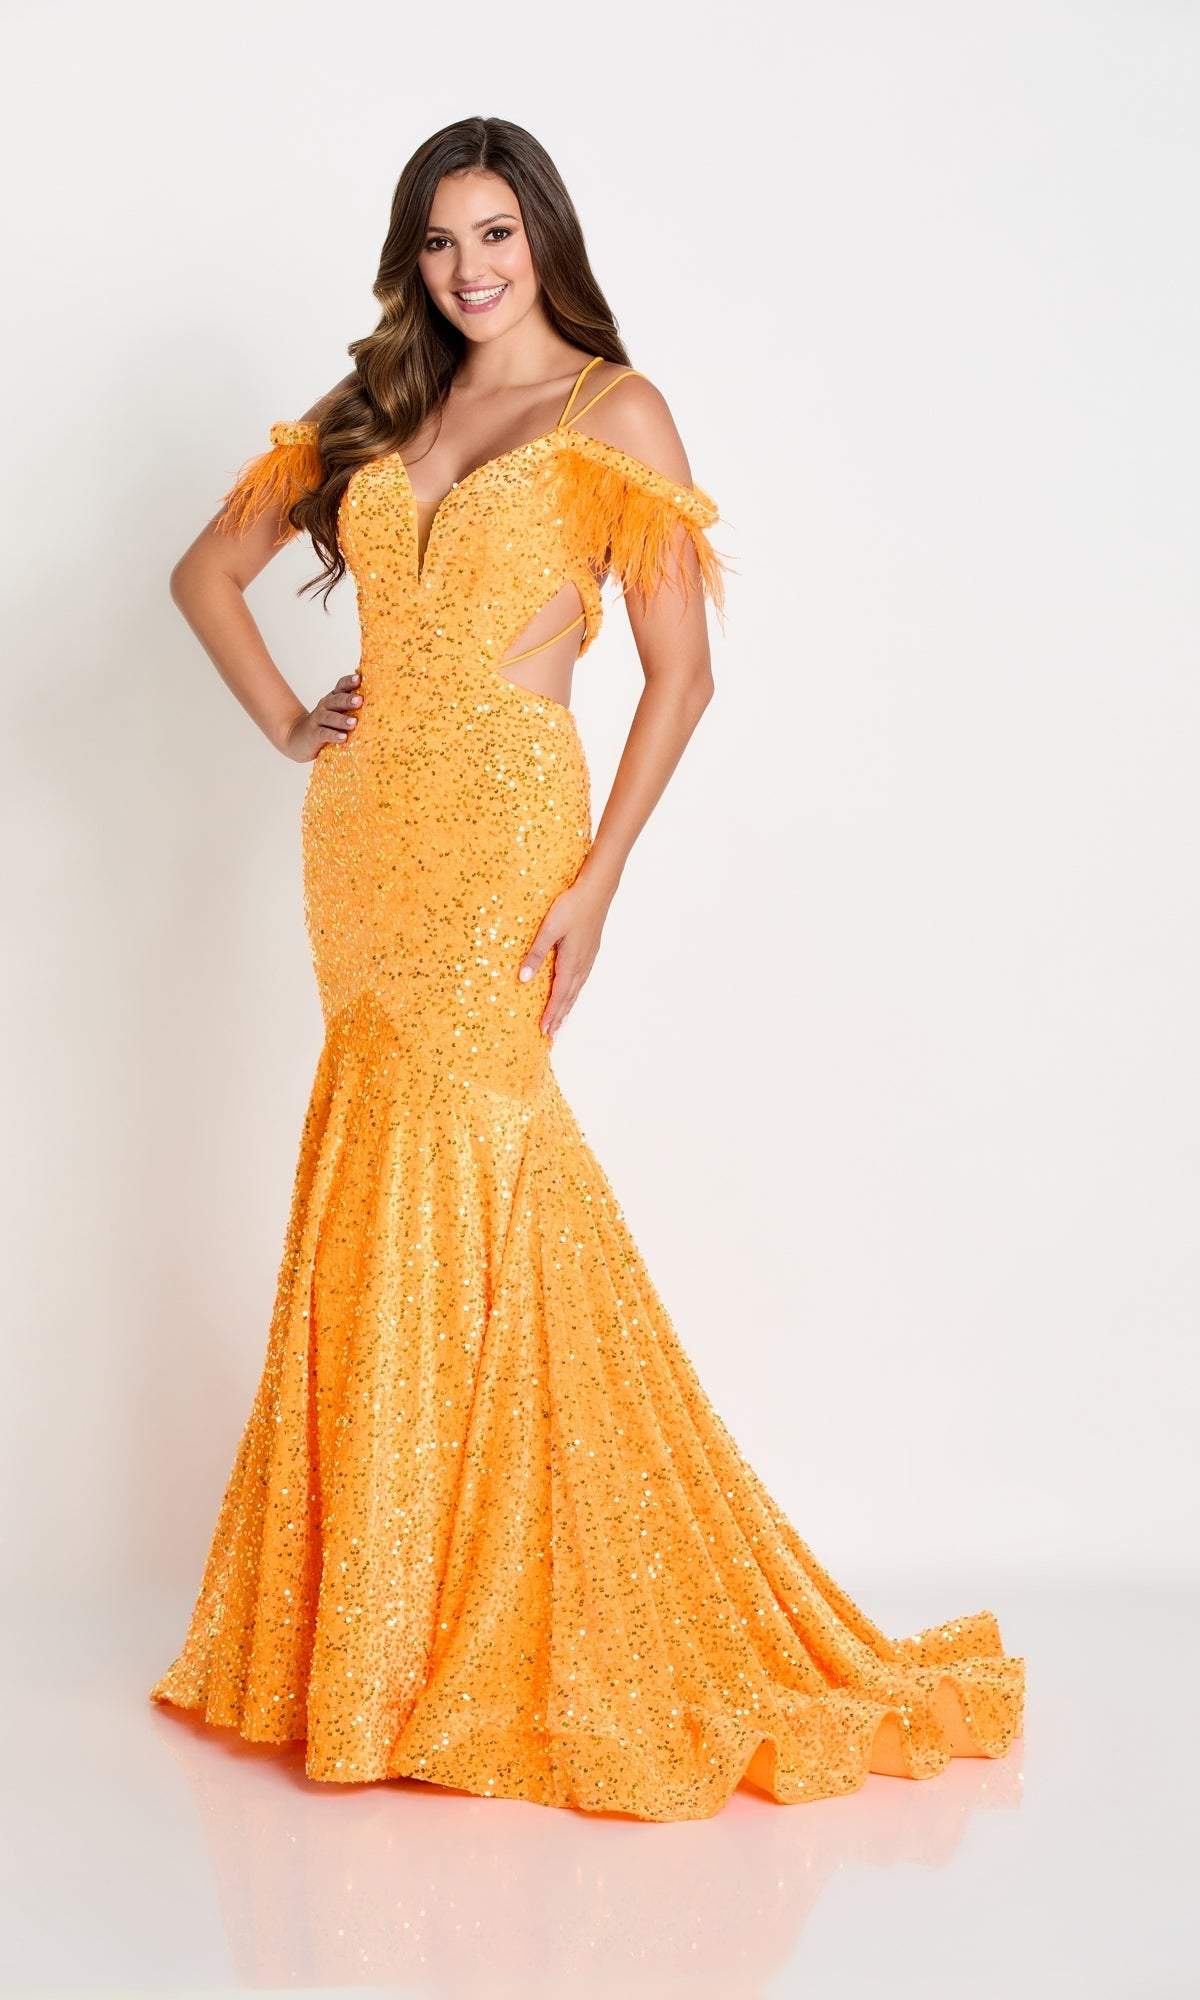 Long Sequin Cut-Out Prom Dress with Feathers